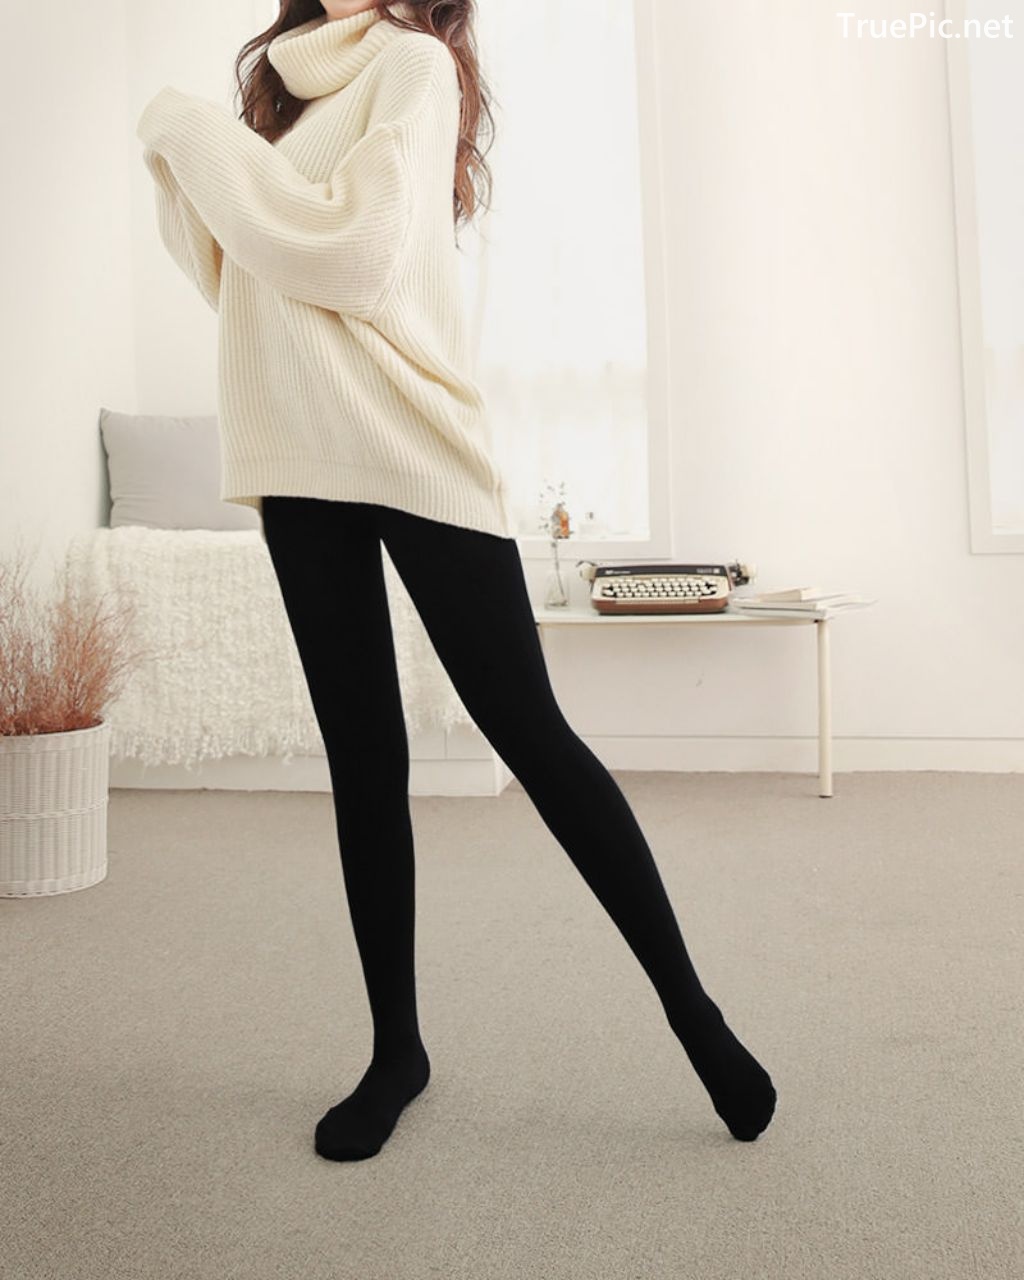 Image-Korean-Fashion-Model-Jin-Hee-Black-Tights-And-Winter-Sweater-Dress-TruePic.net- Picture-24